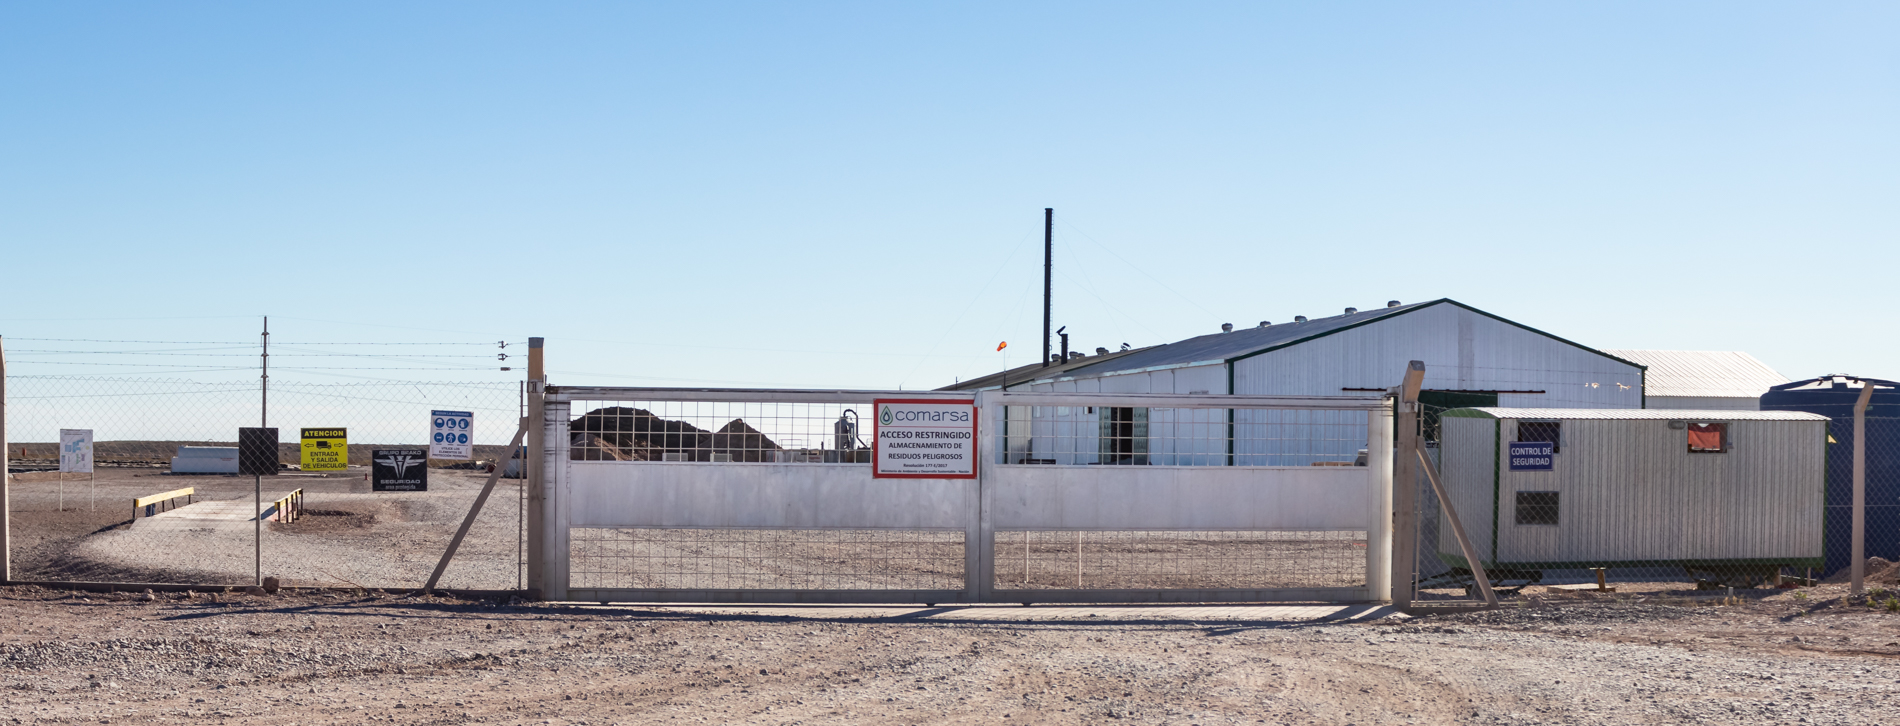 Outside the gates of Comarsa's Añelo oil and gas waste processing facility in Neuquén province, Argentina